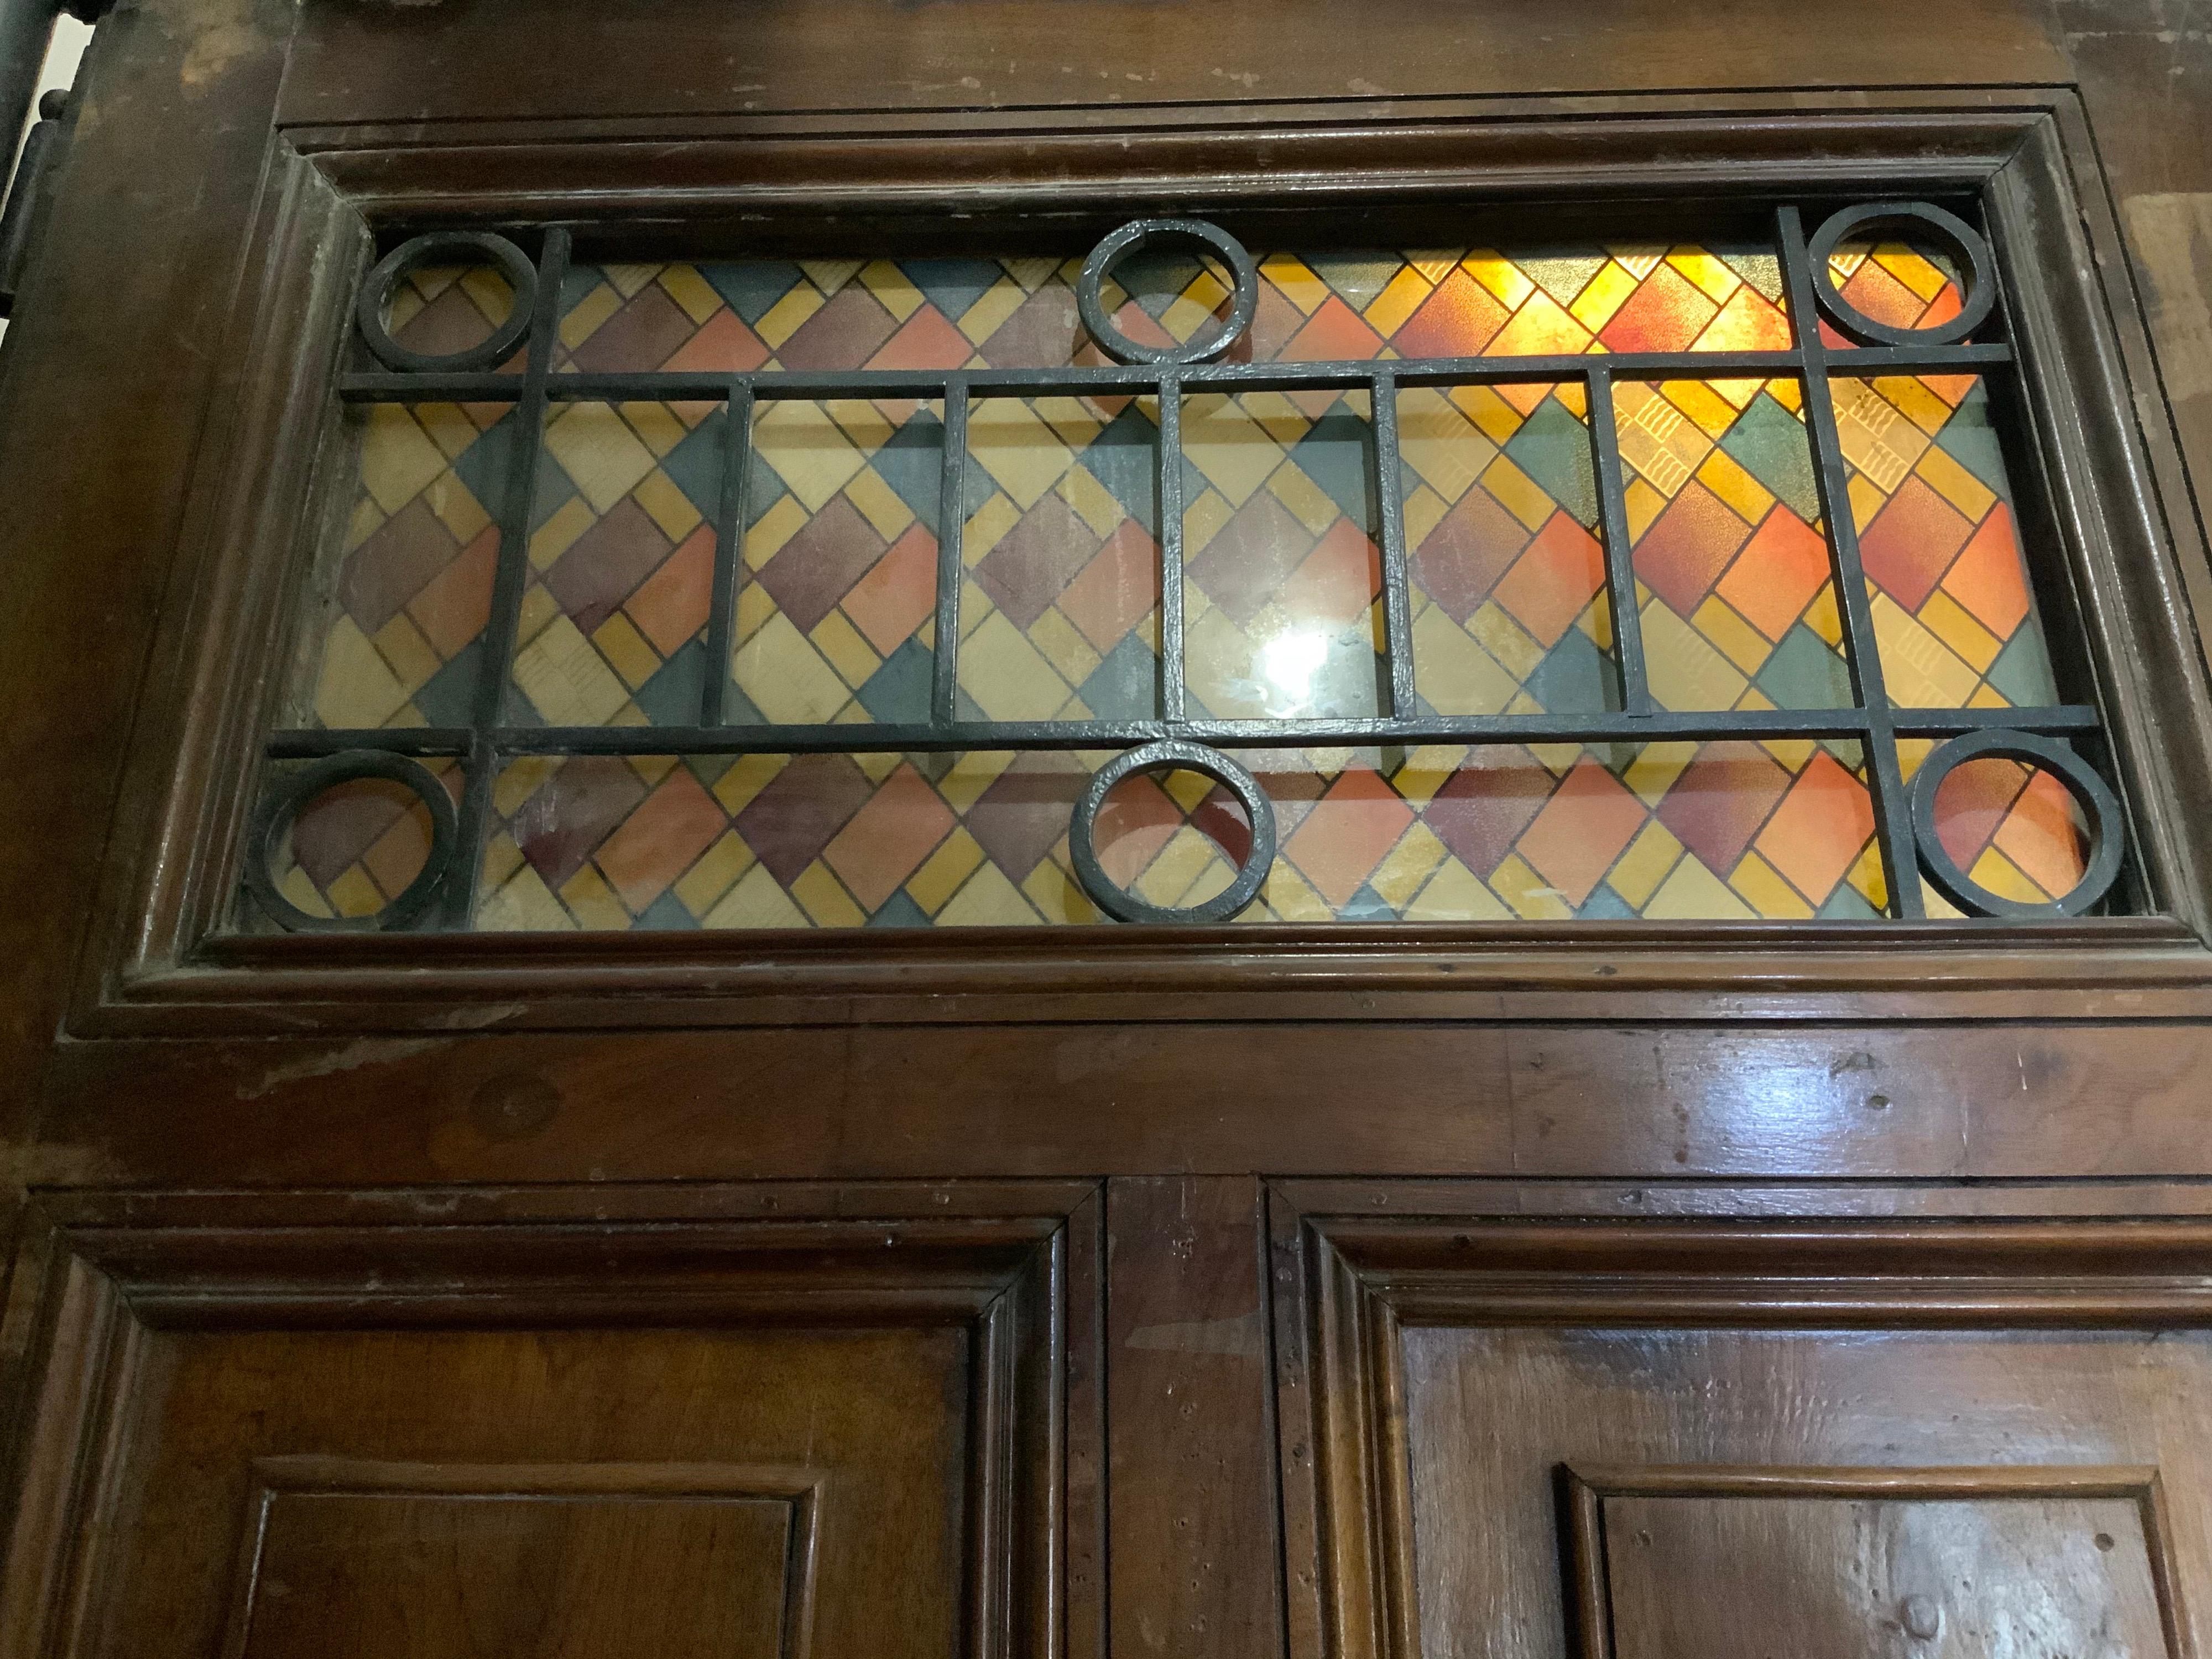 This walnut door origins from France, circa 1880.

It has a beautiful colorful stained glass.